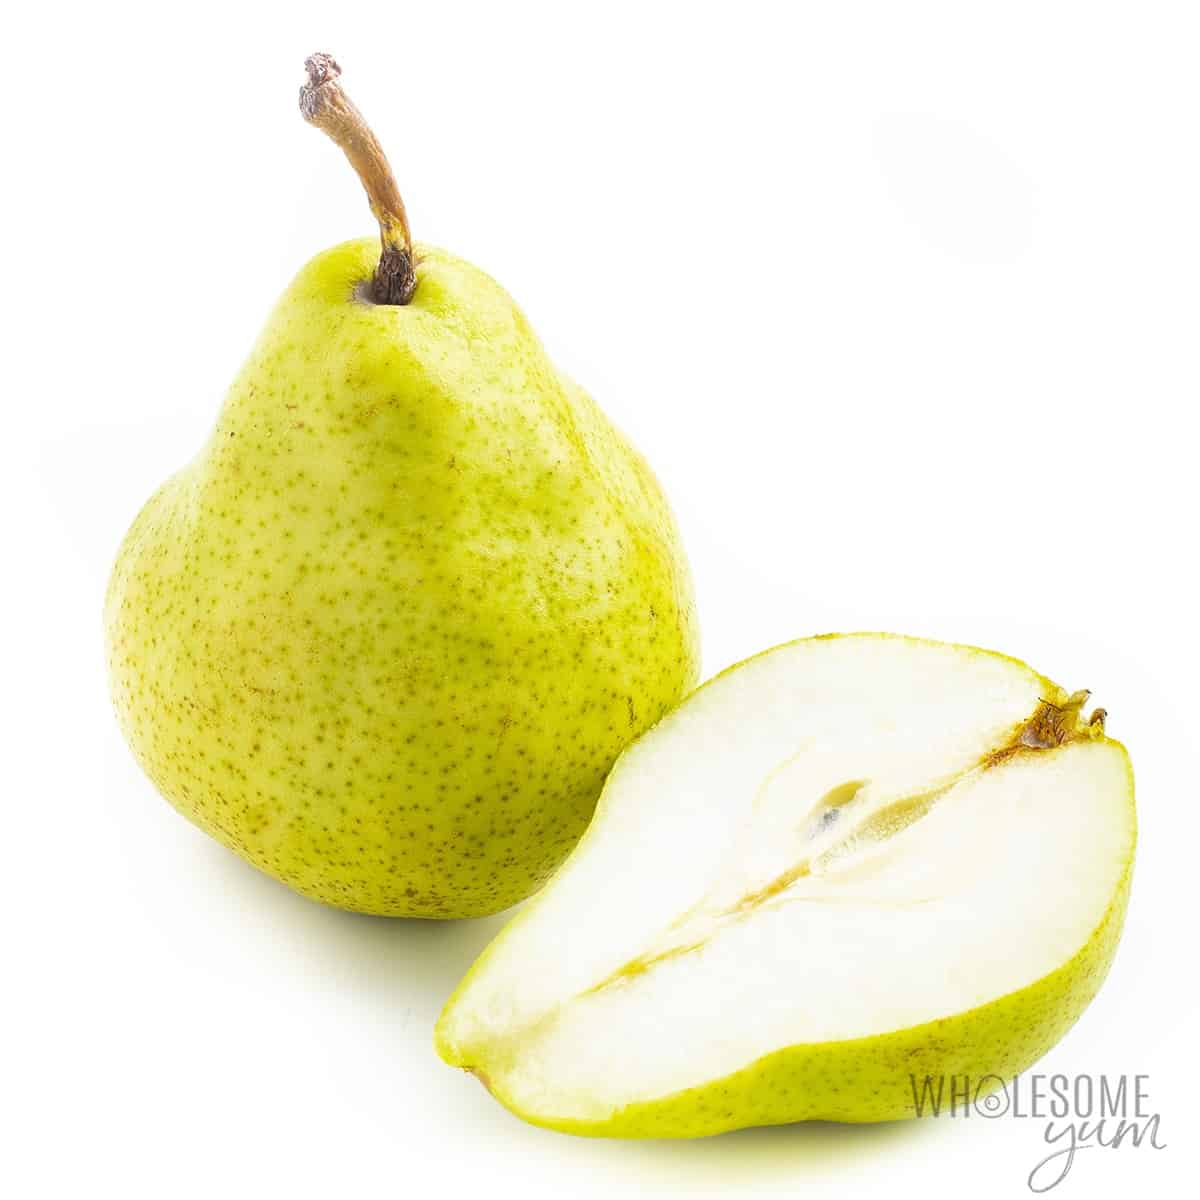 Are pears keto friendly? This whole and halved pear is not keto.